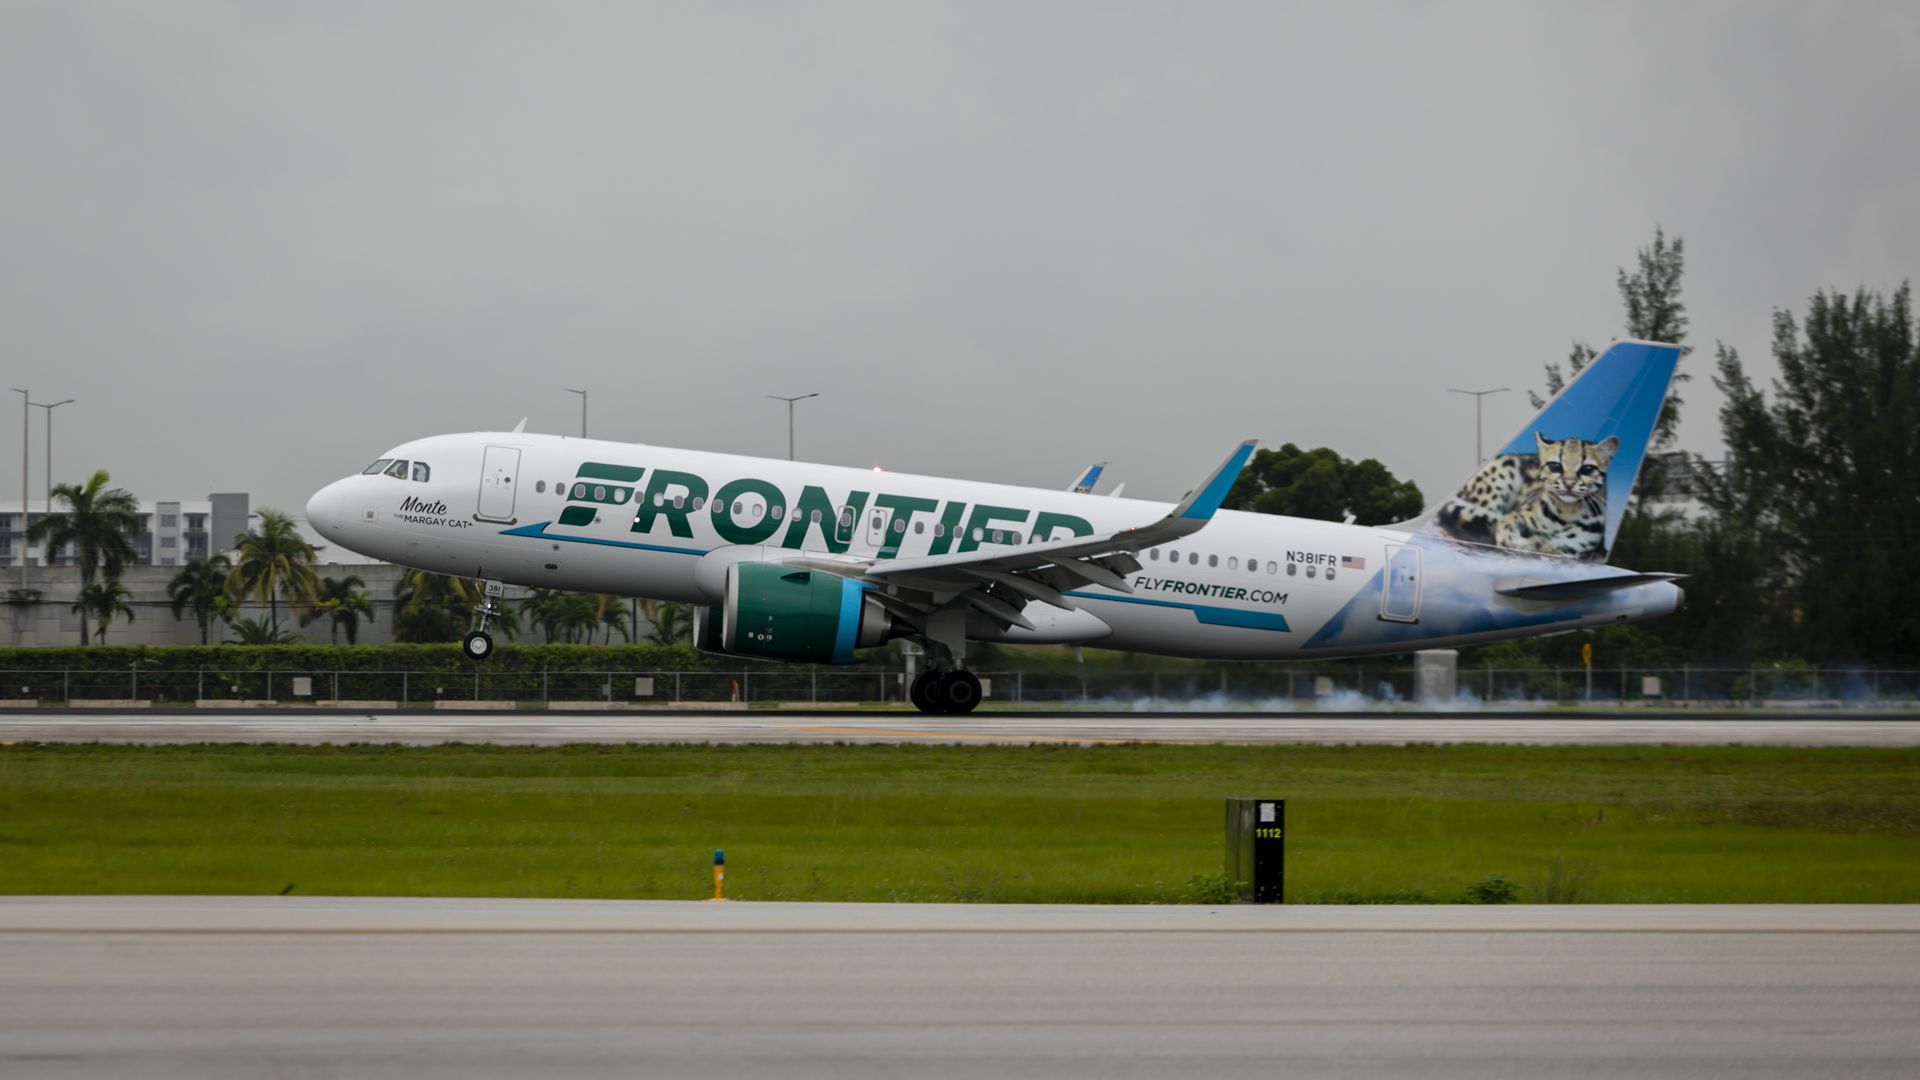 Picture of a Frontier Airlines Airbus A320-NEO landing.